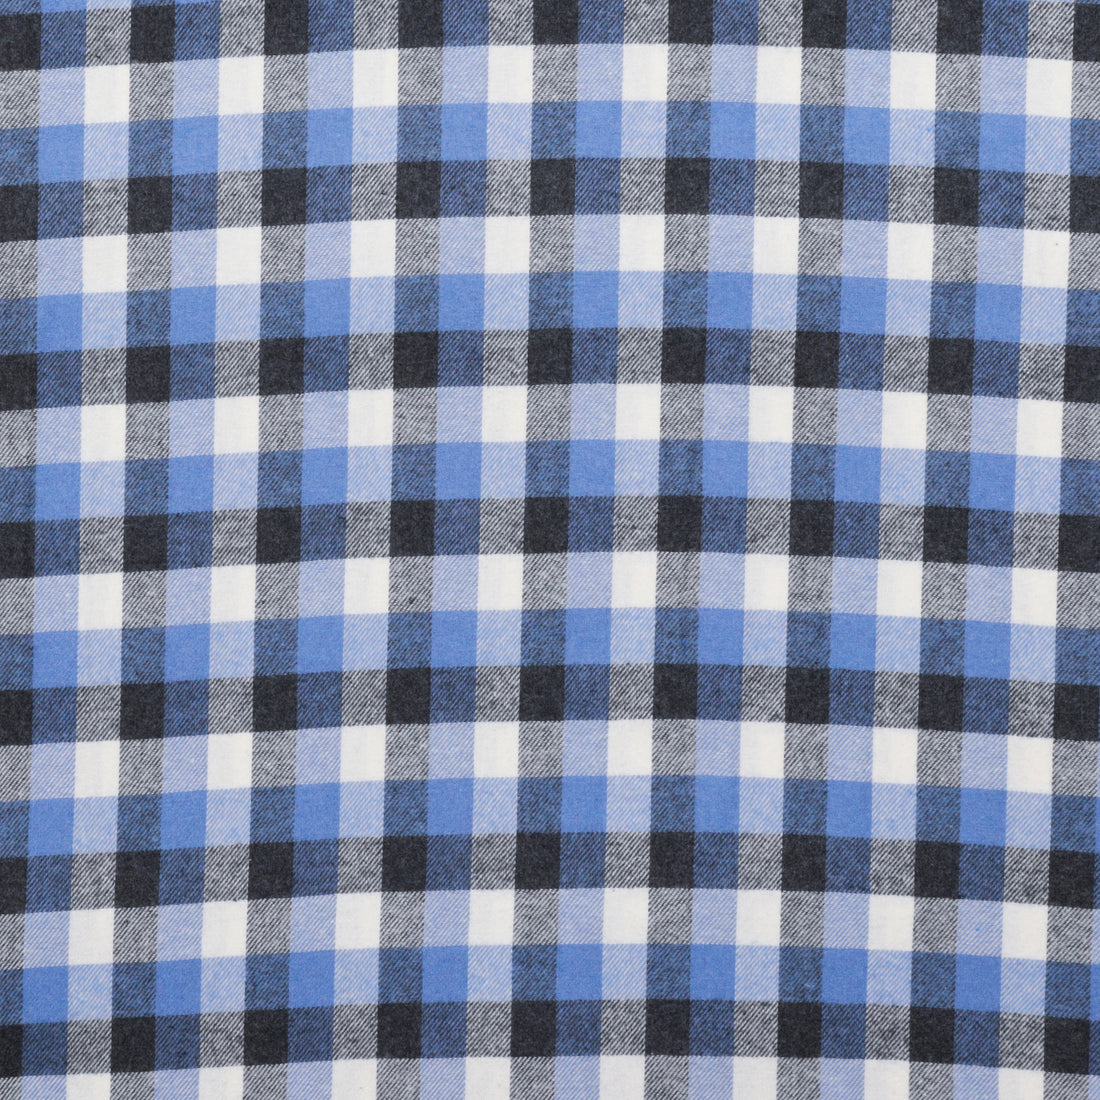 Katia - Recycled Cotton - Gingham Tricolor - Assorted